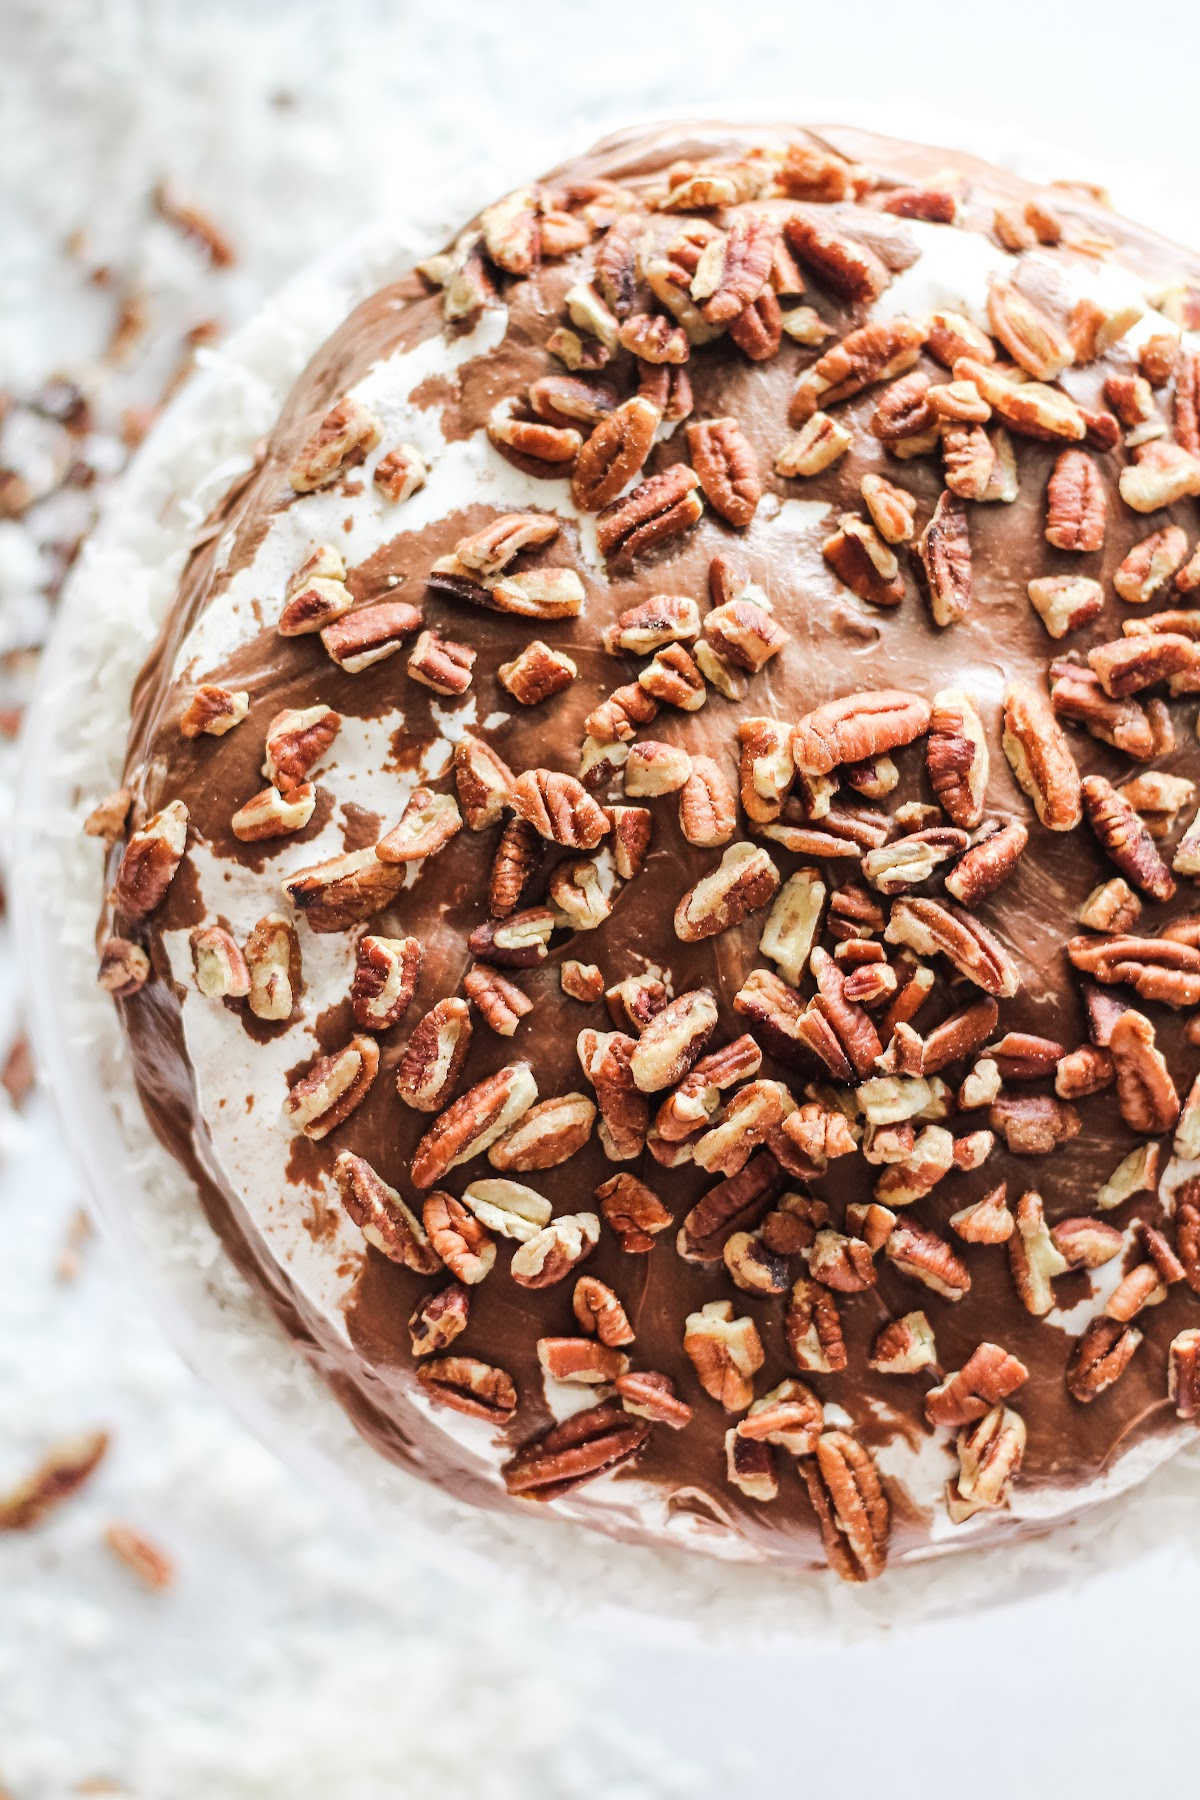 Looking down on whole mudslide cake with marshmallow fluff showing through chocolate icing and pecans.